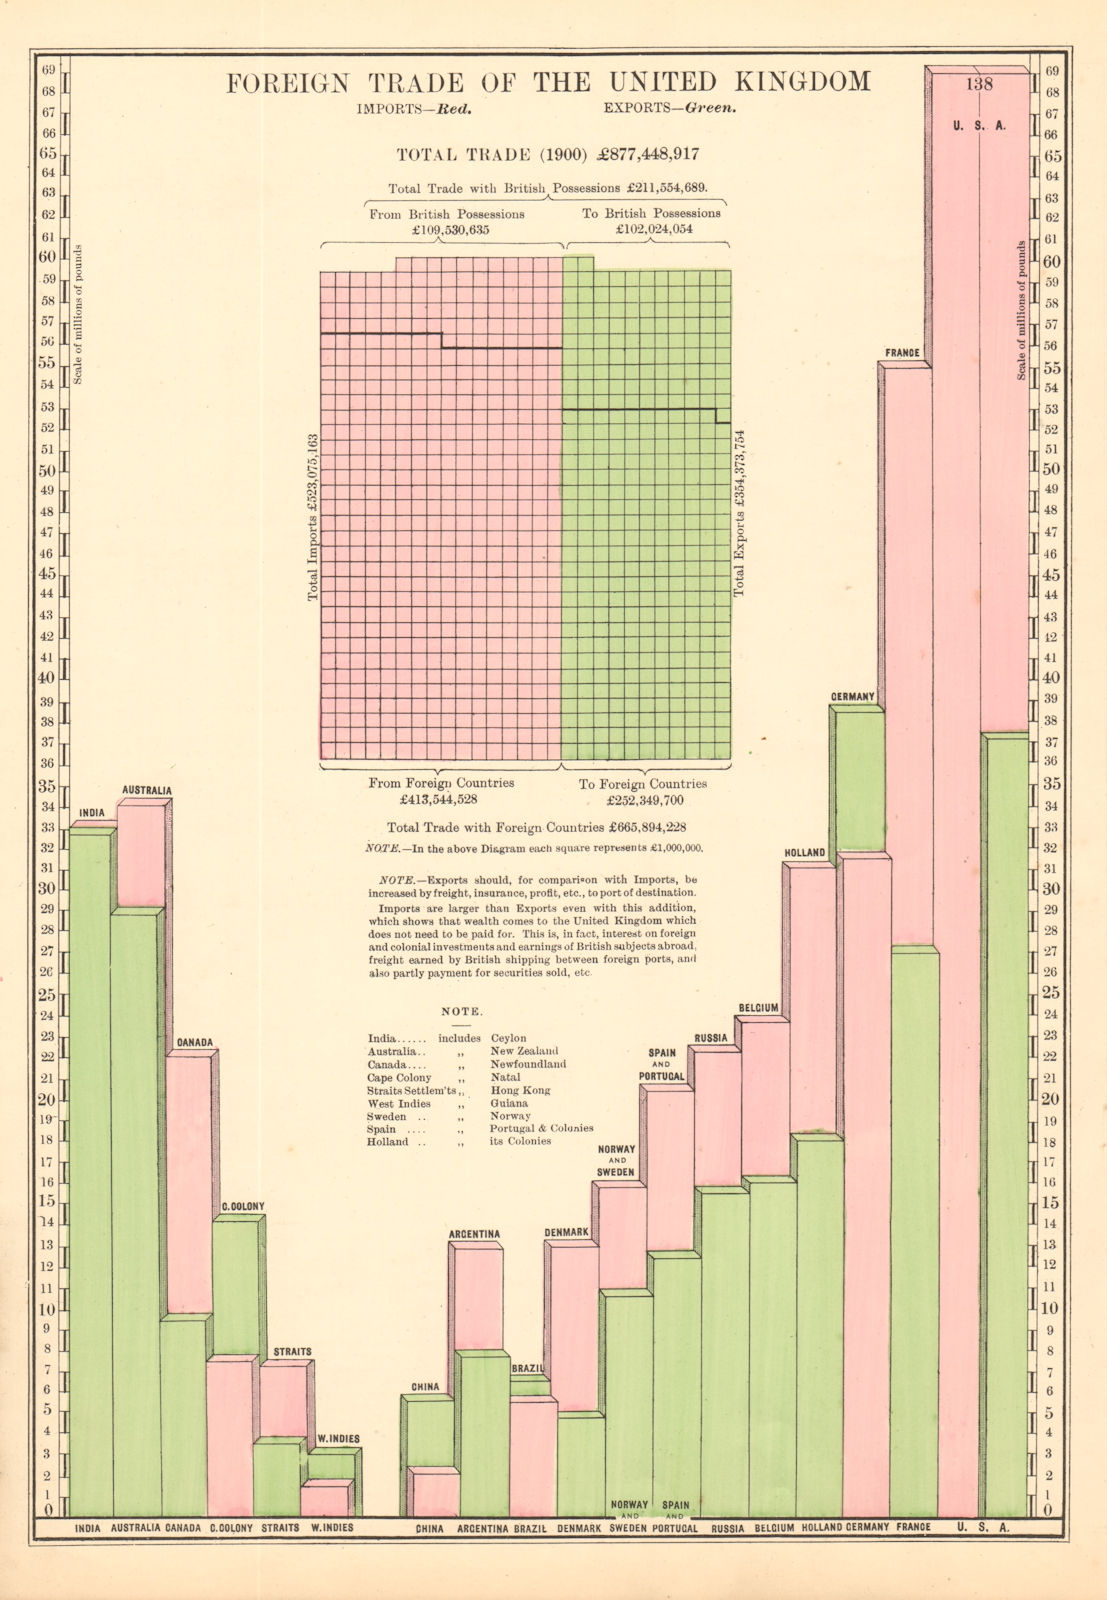 Associate Product UK FOREIGN TRADE. Imports (pink) Exports (green) by country. BACON 1904 print